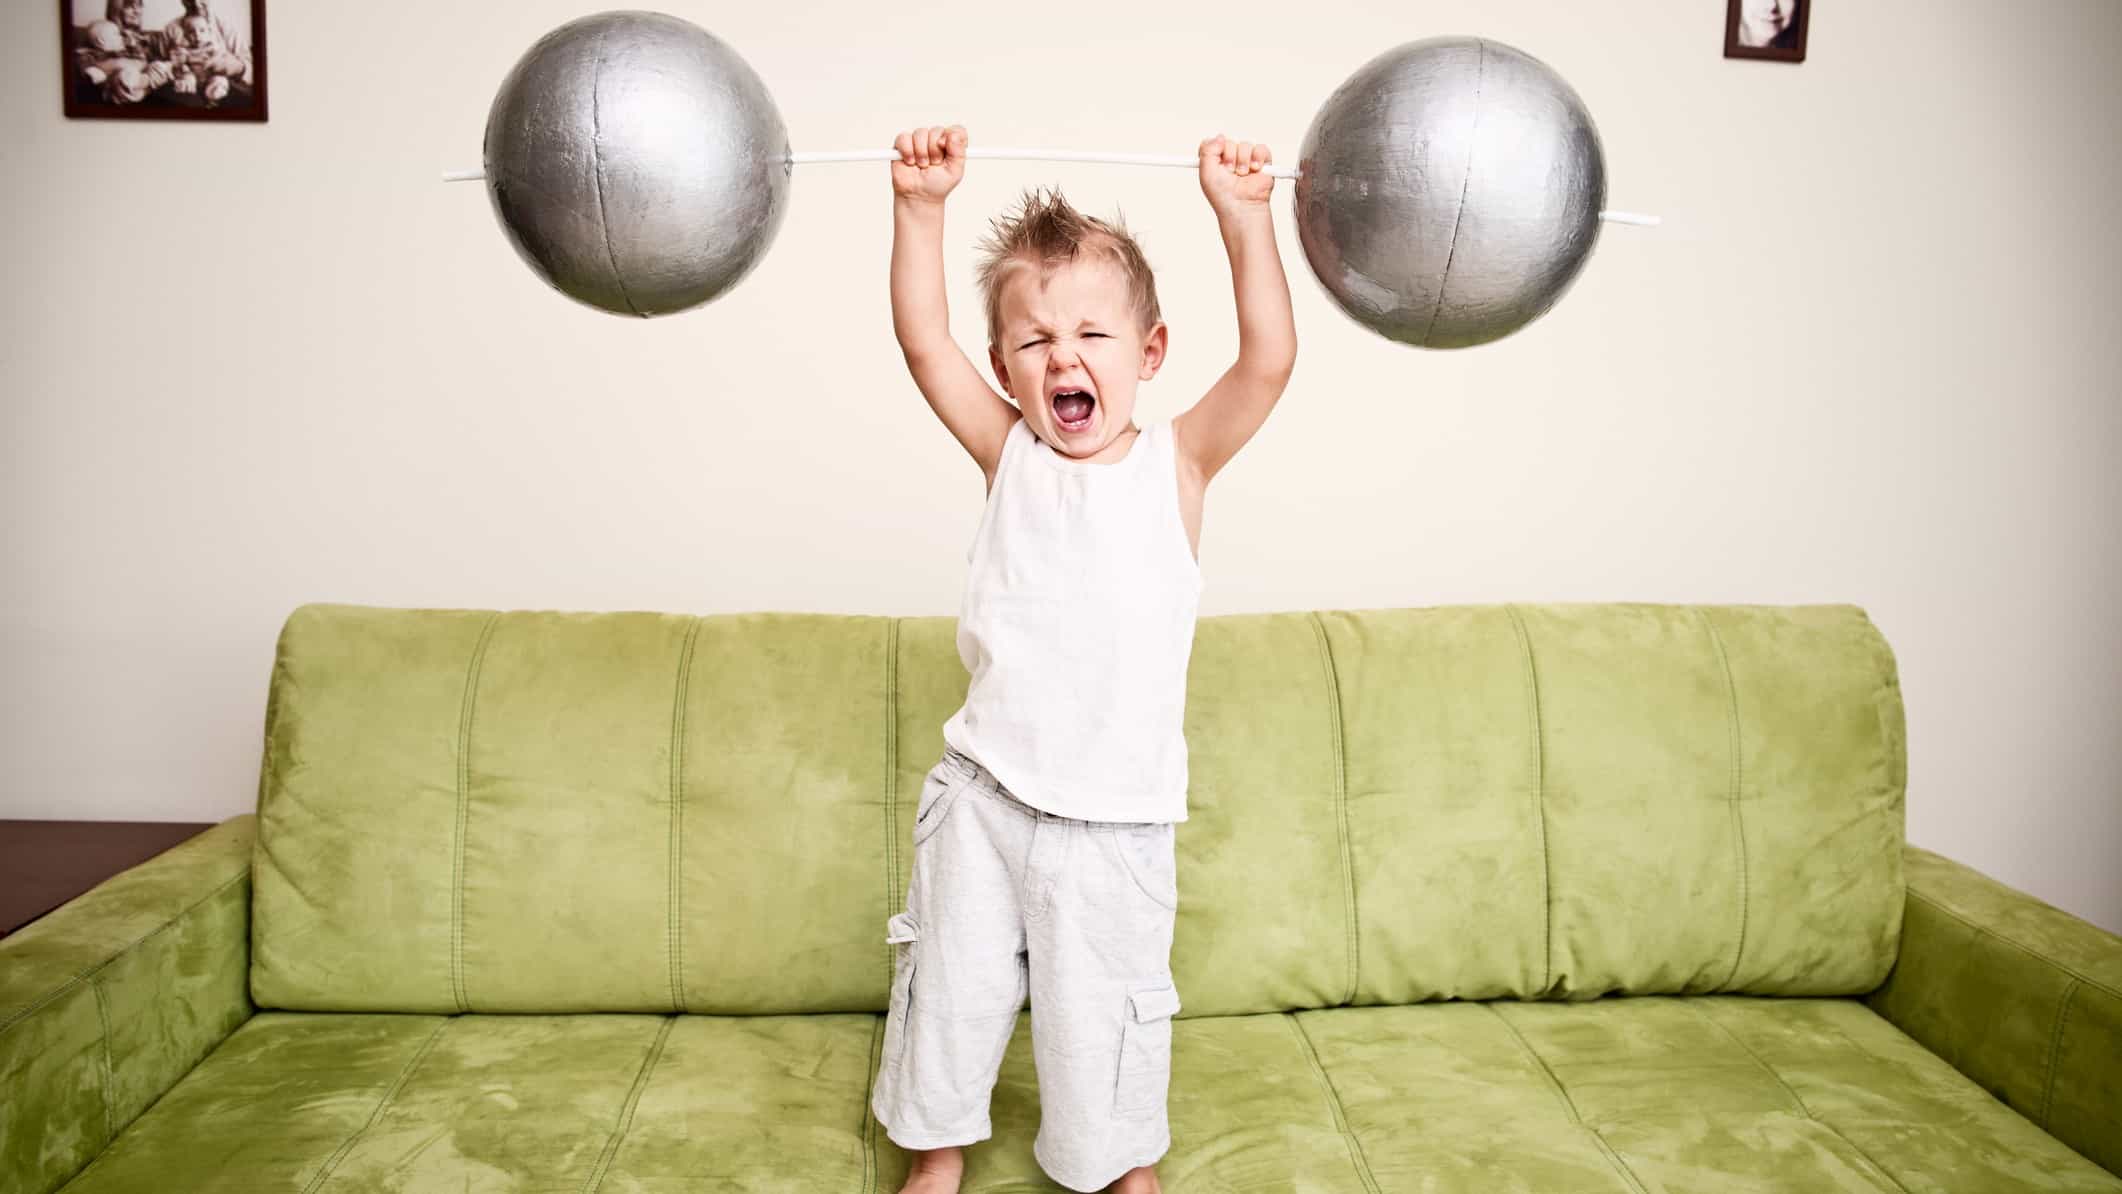 Young boy lifts bir barbell while standing on couch